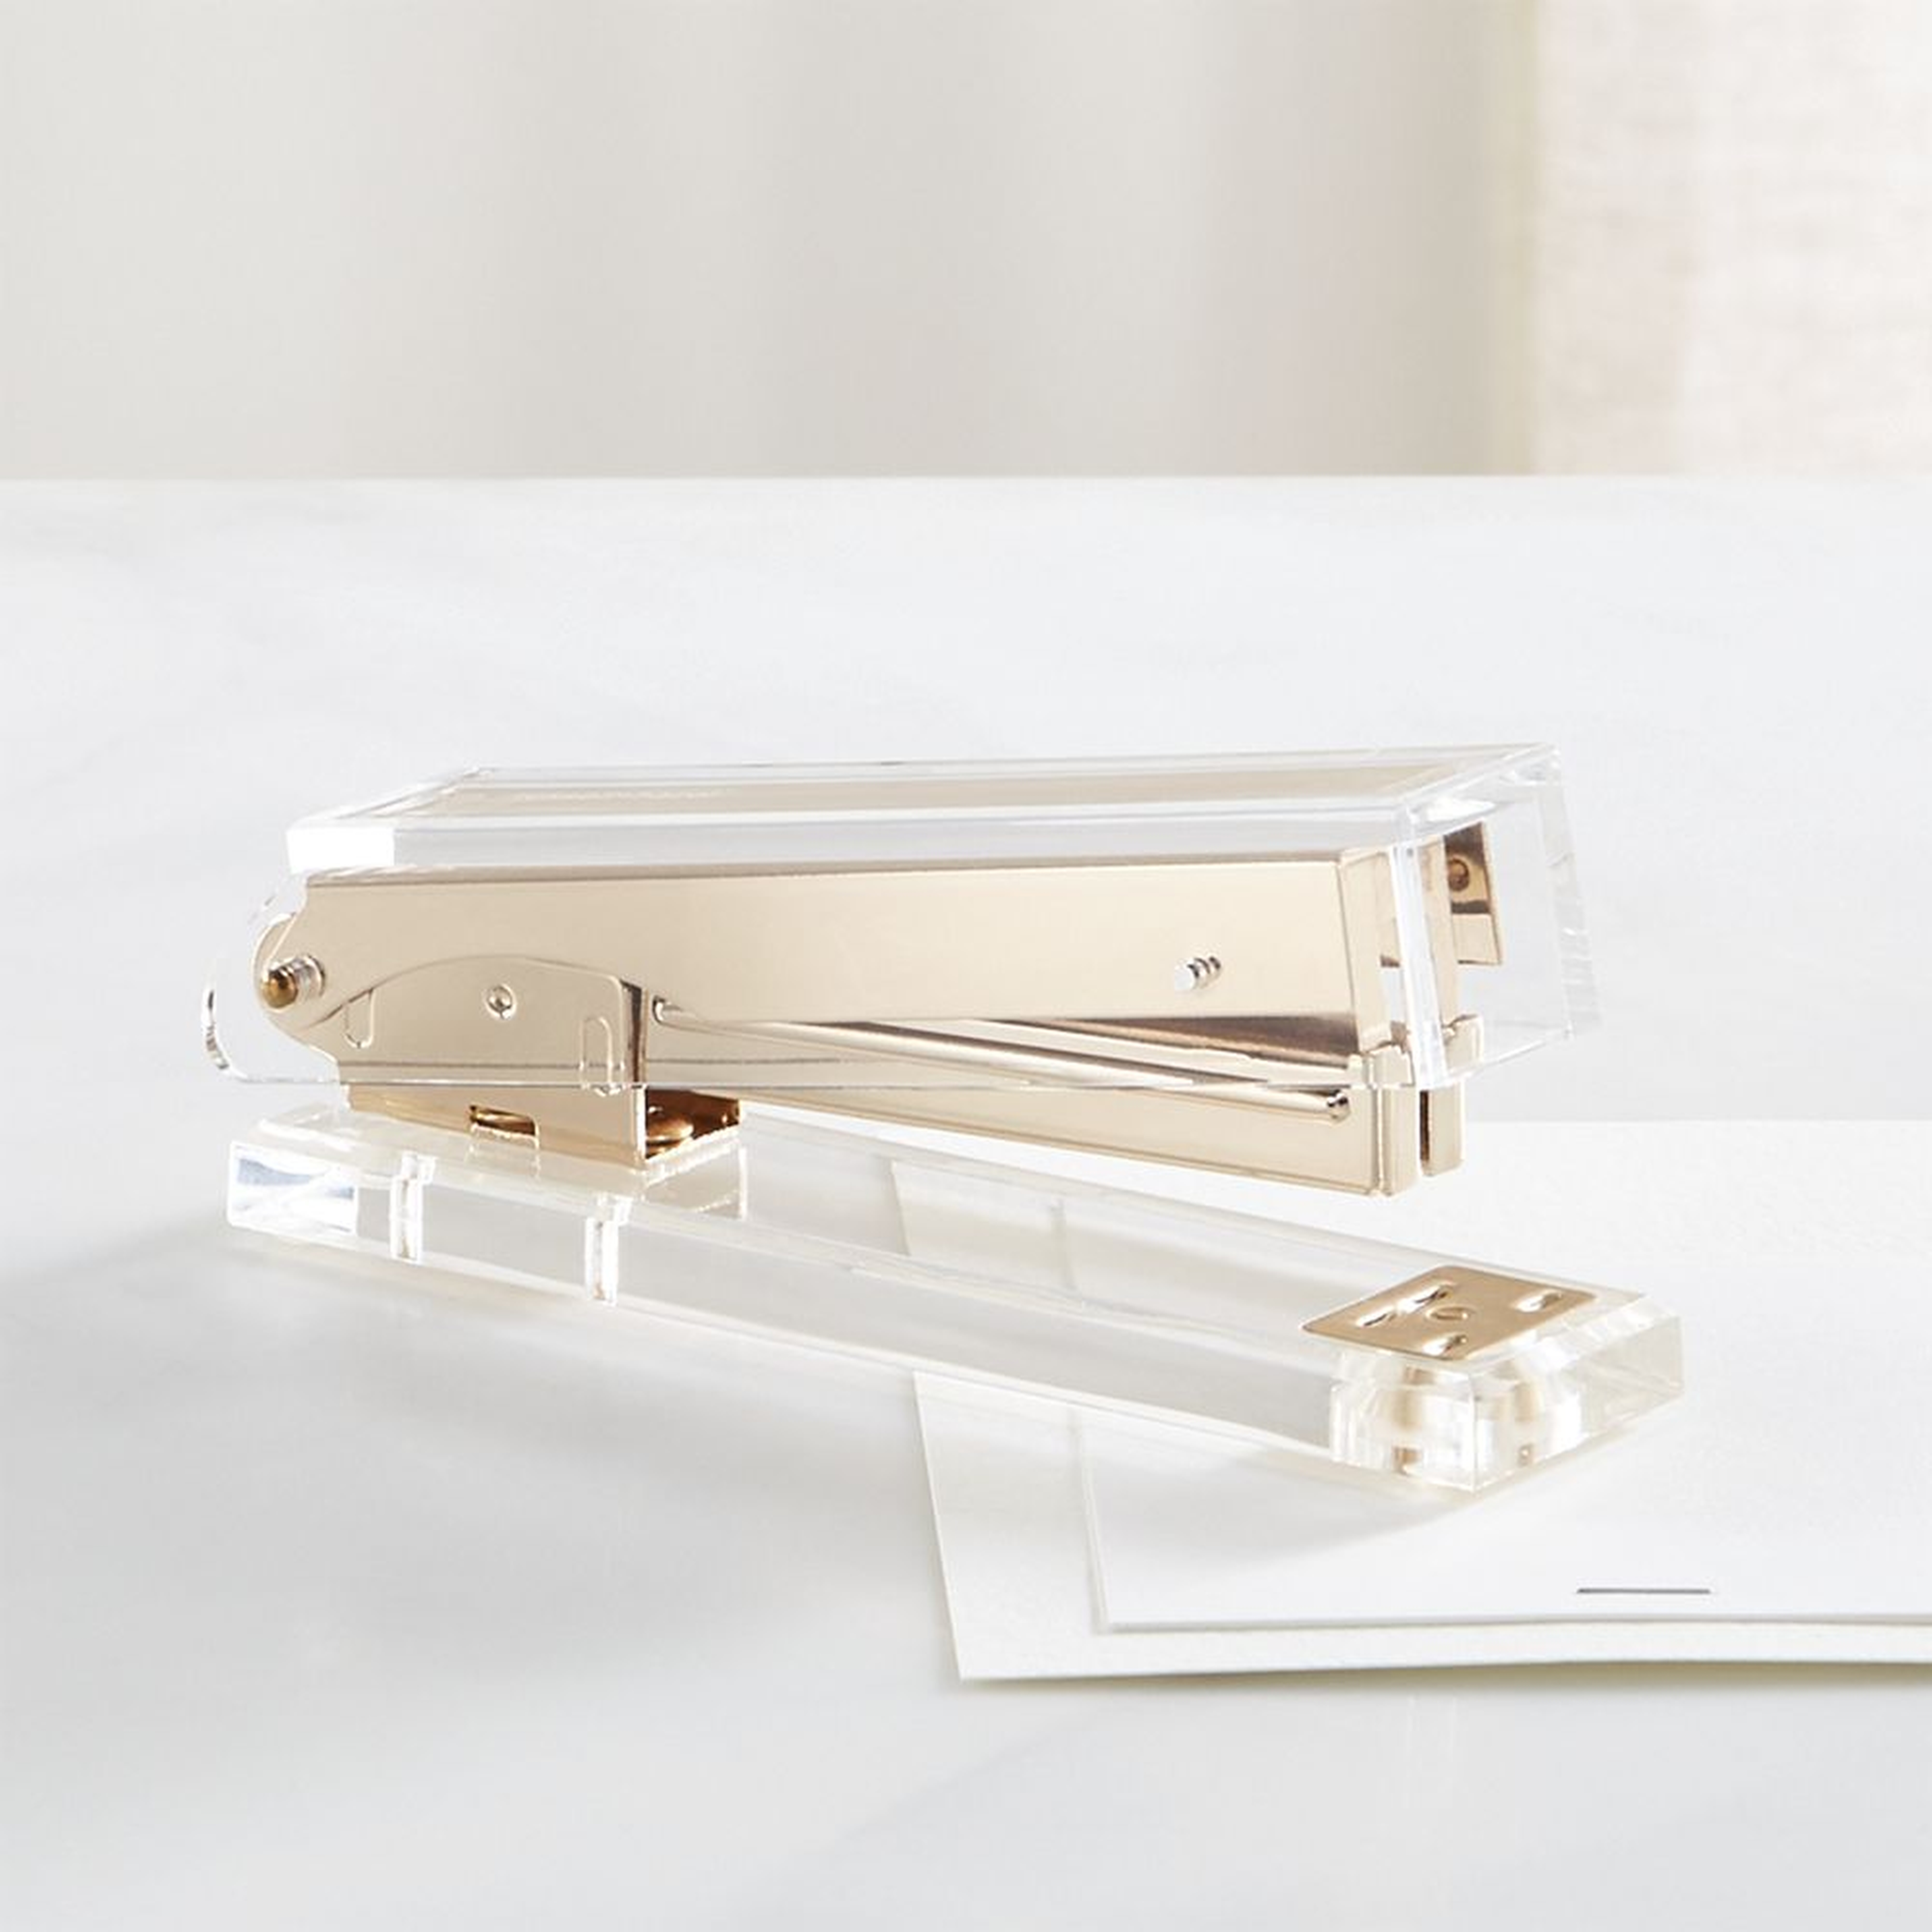 Russell + Hazel Gold and Acrylic Stapler - Crate and Barrel